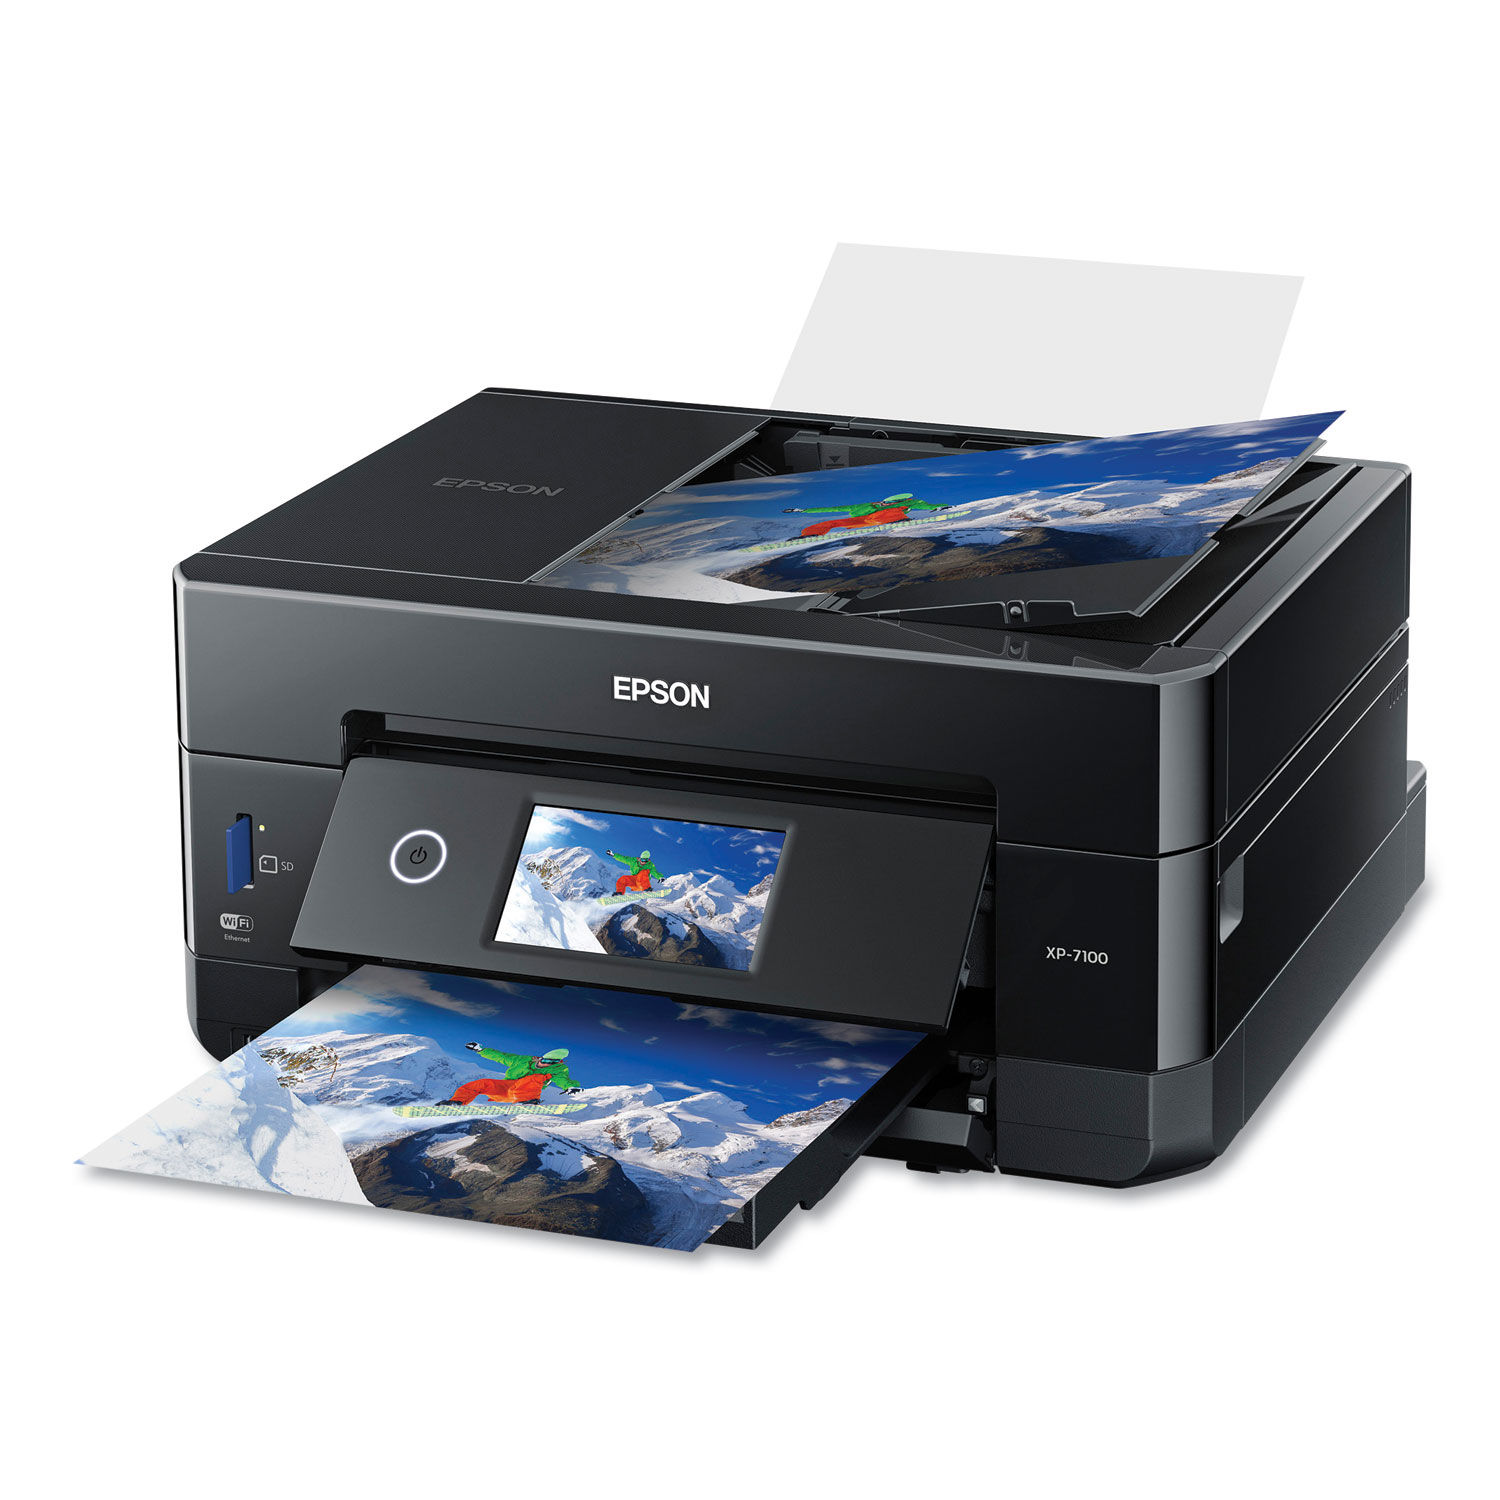 Expression Premium Xp 7100 Small In One Printer By Epson® Epsc11ch03201 8021